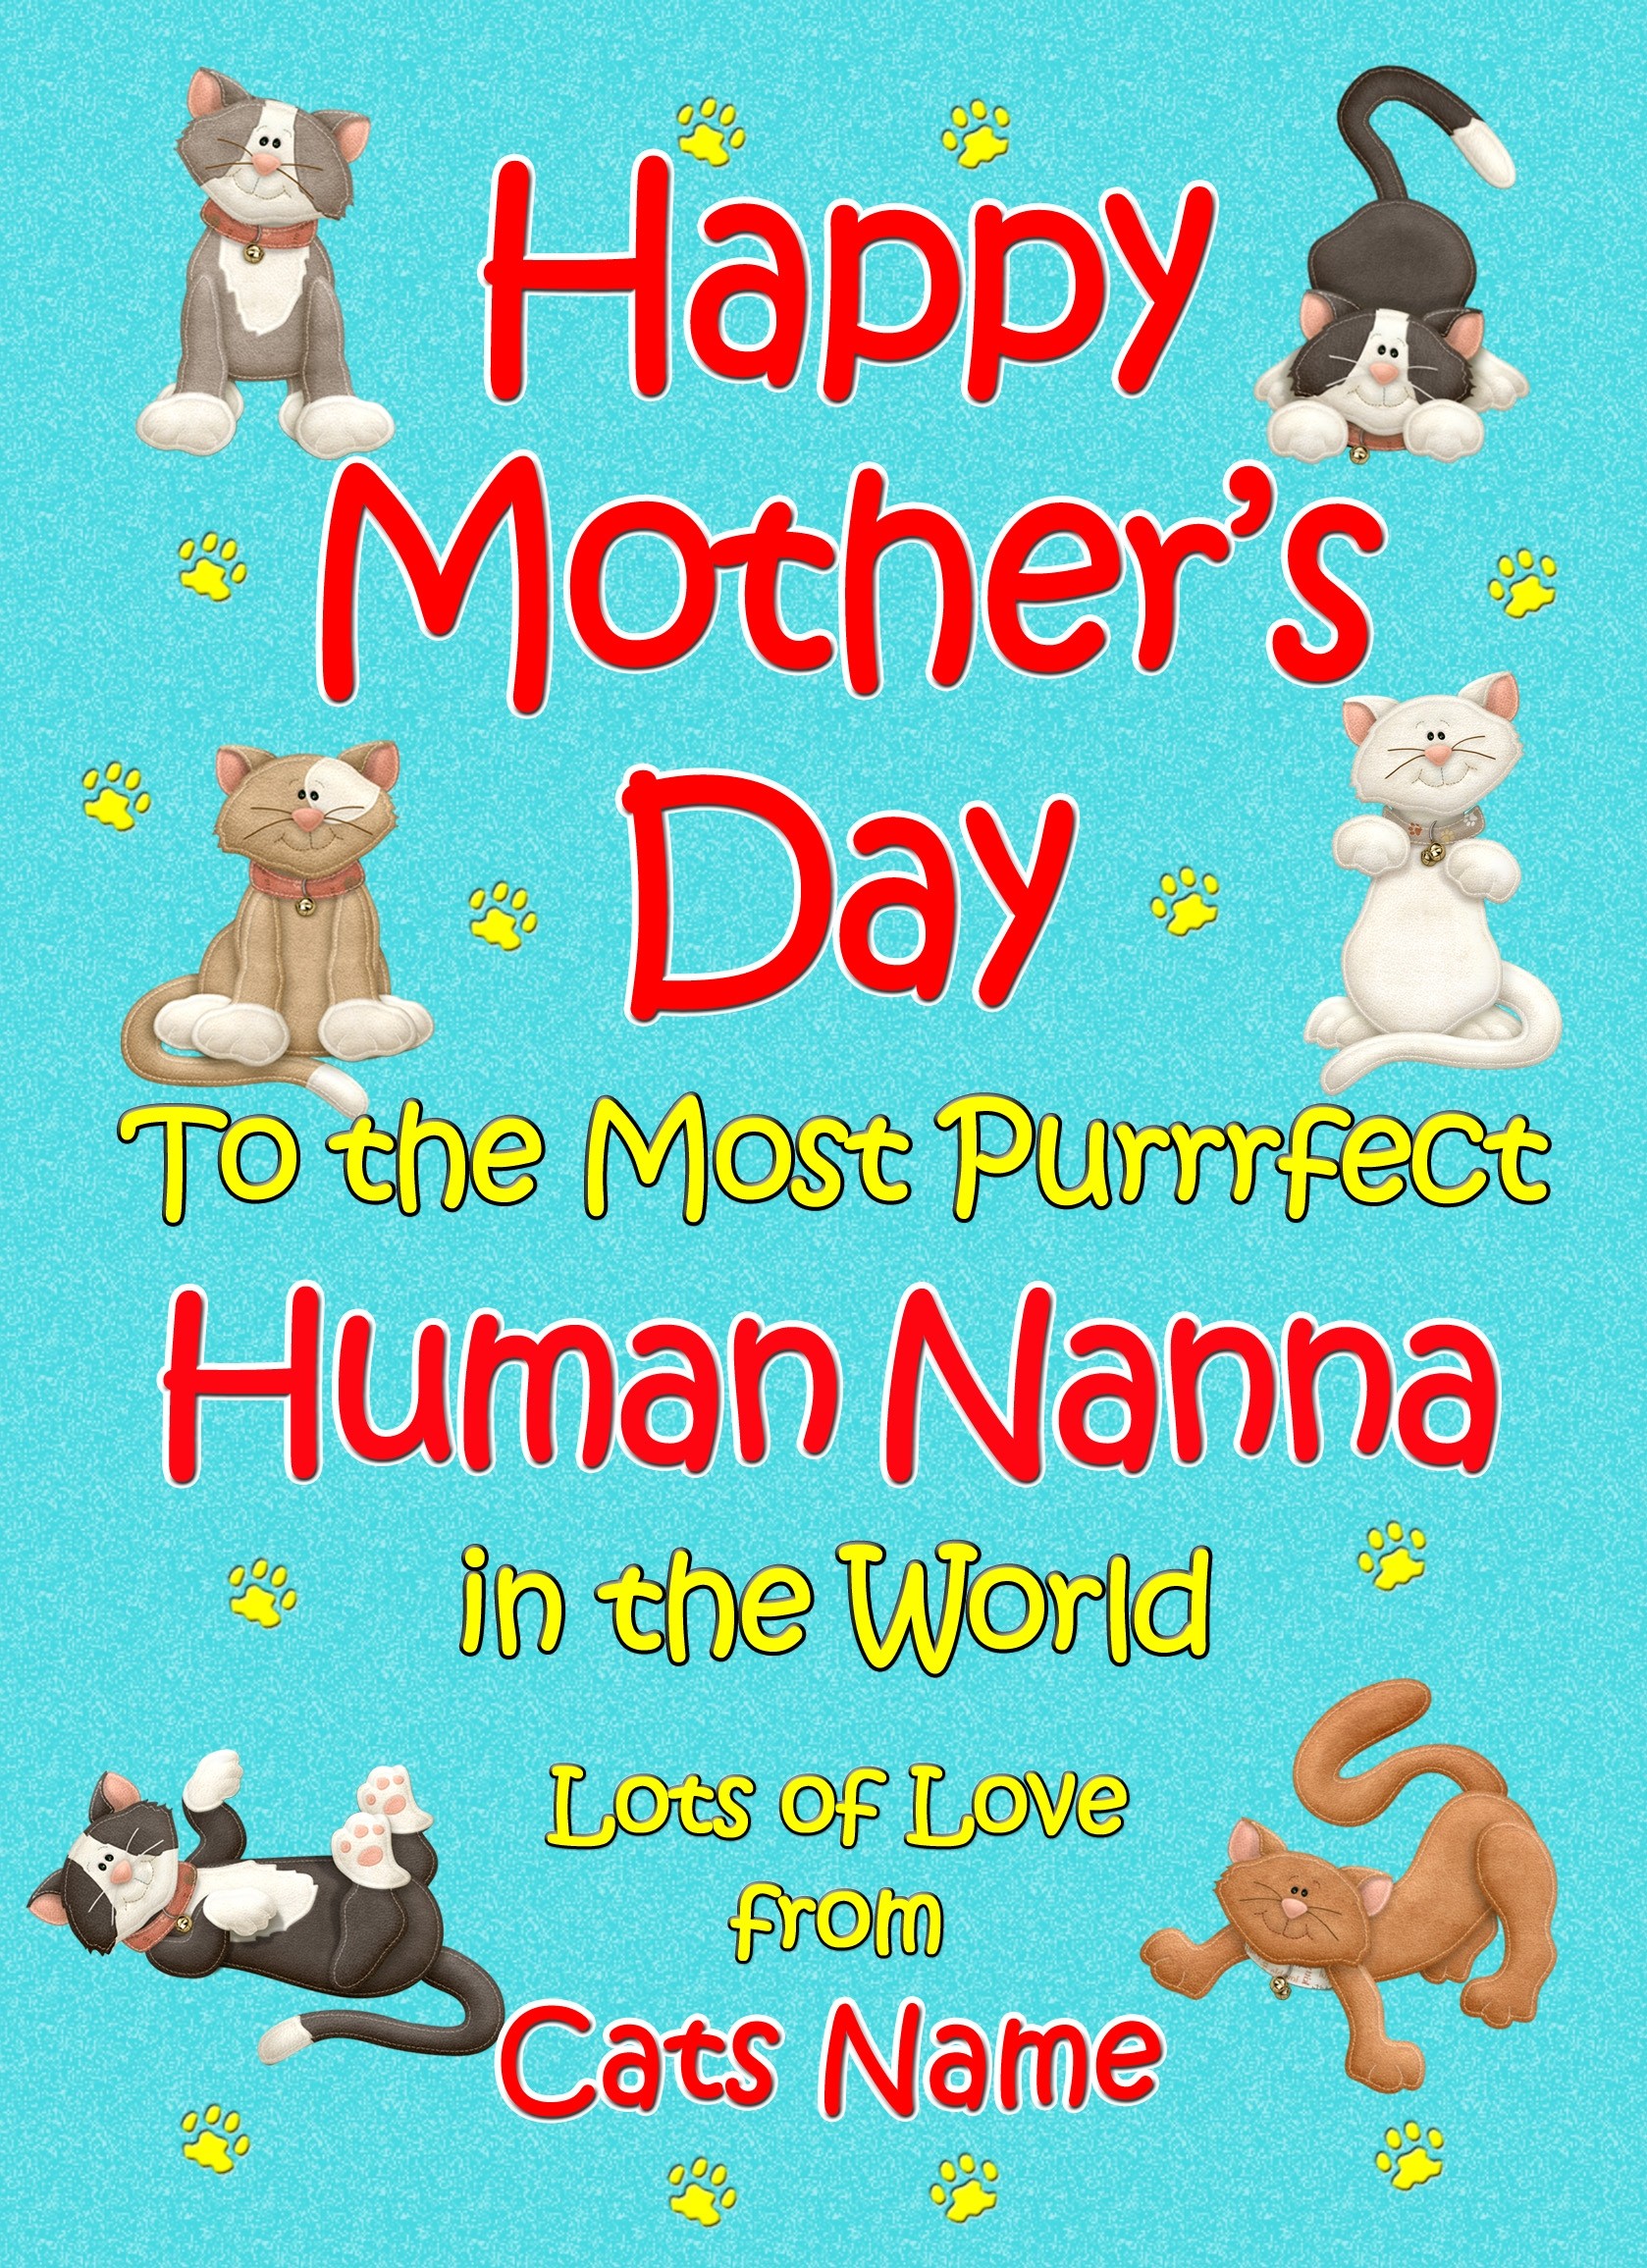 Personalised From The Cat Mothers Day Card (Turquoise, Purrrfect Human Nanna)